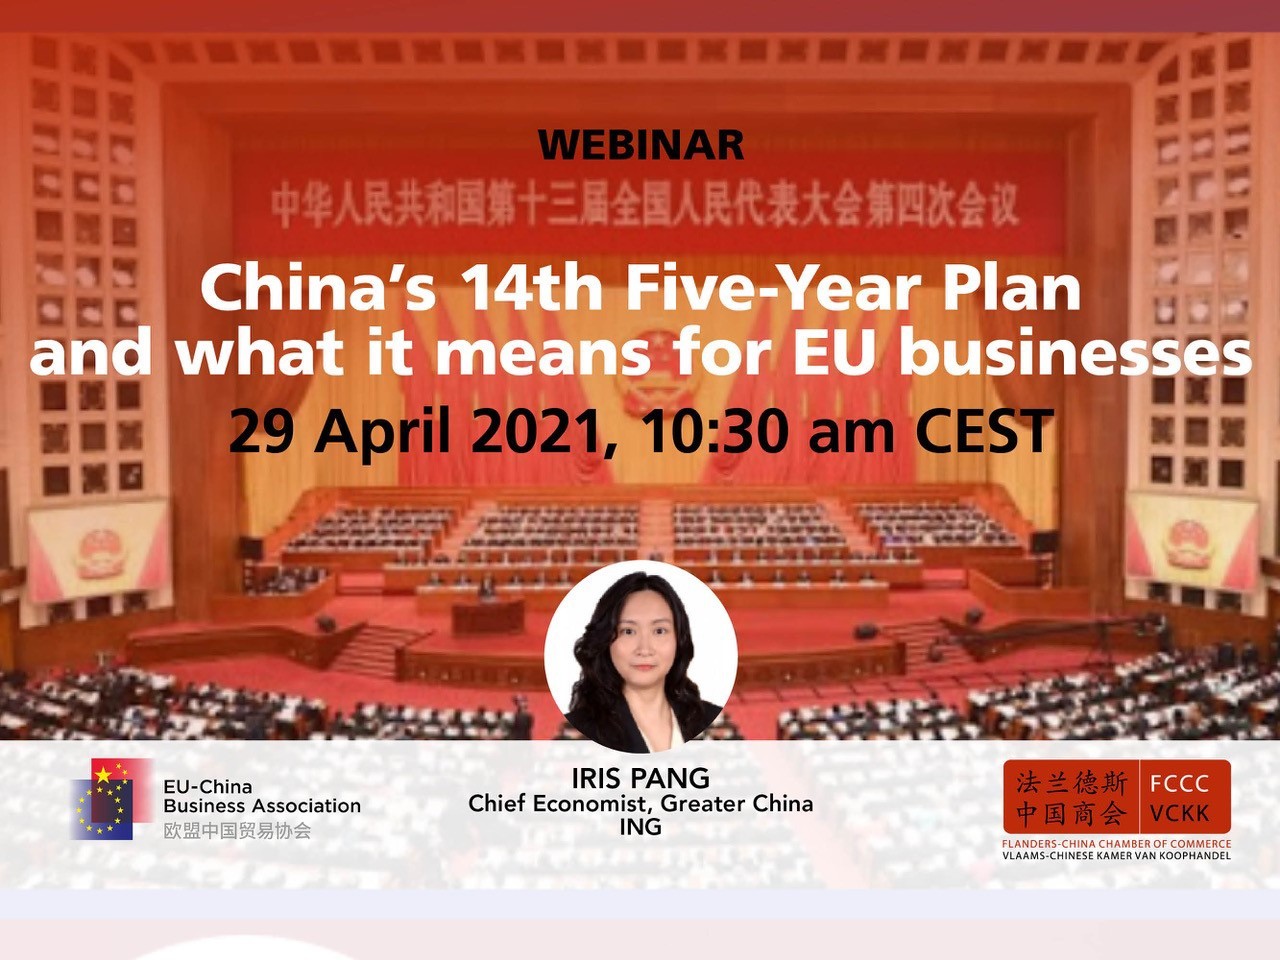 Webinar: China's 14th Five-Year Plan and what it means for EU businesses